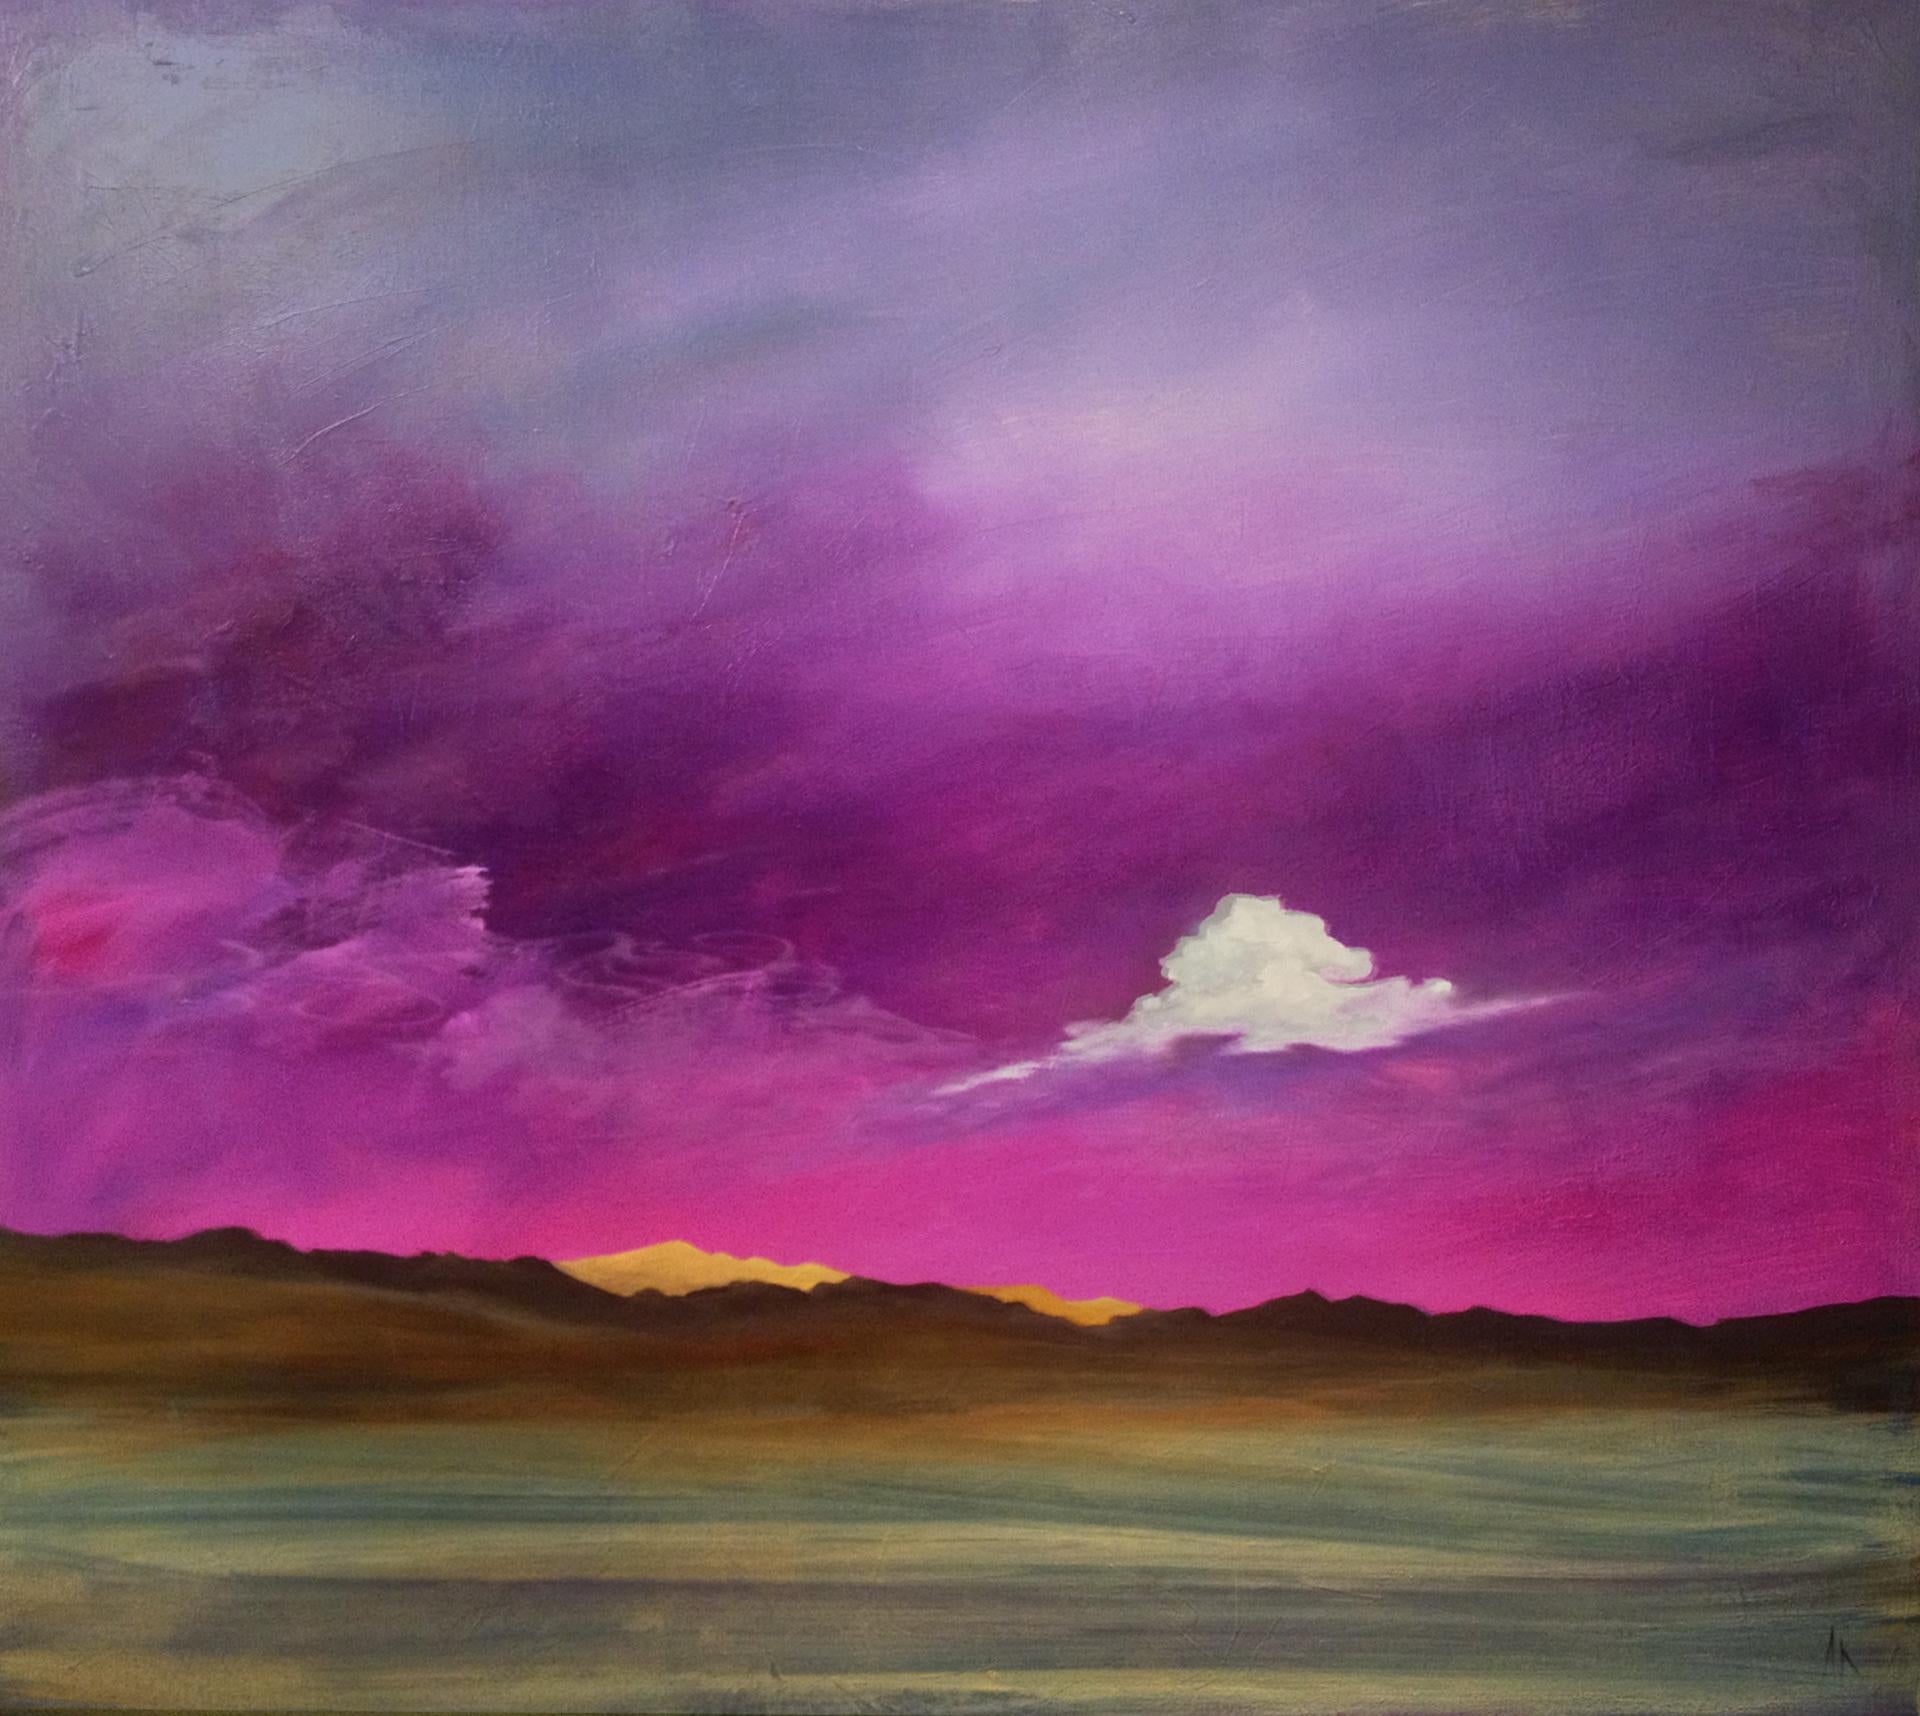 Alyson Kinkade Abstract Painting - Reaching into your Sky, 44x50" oil on linen